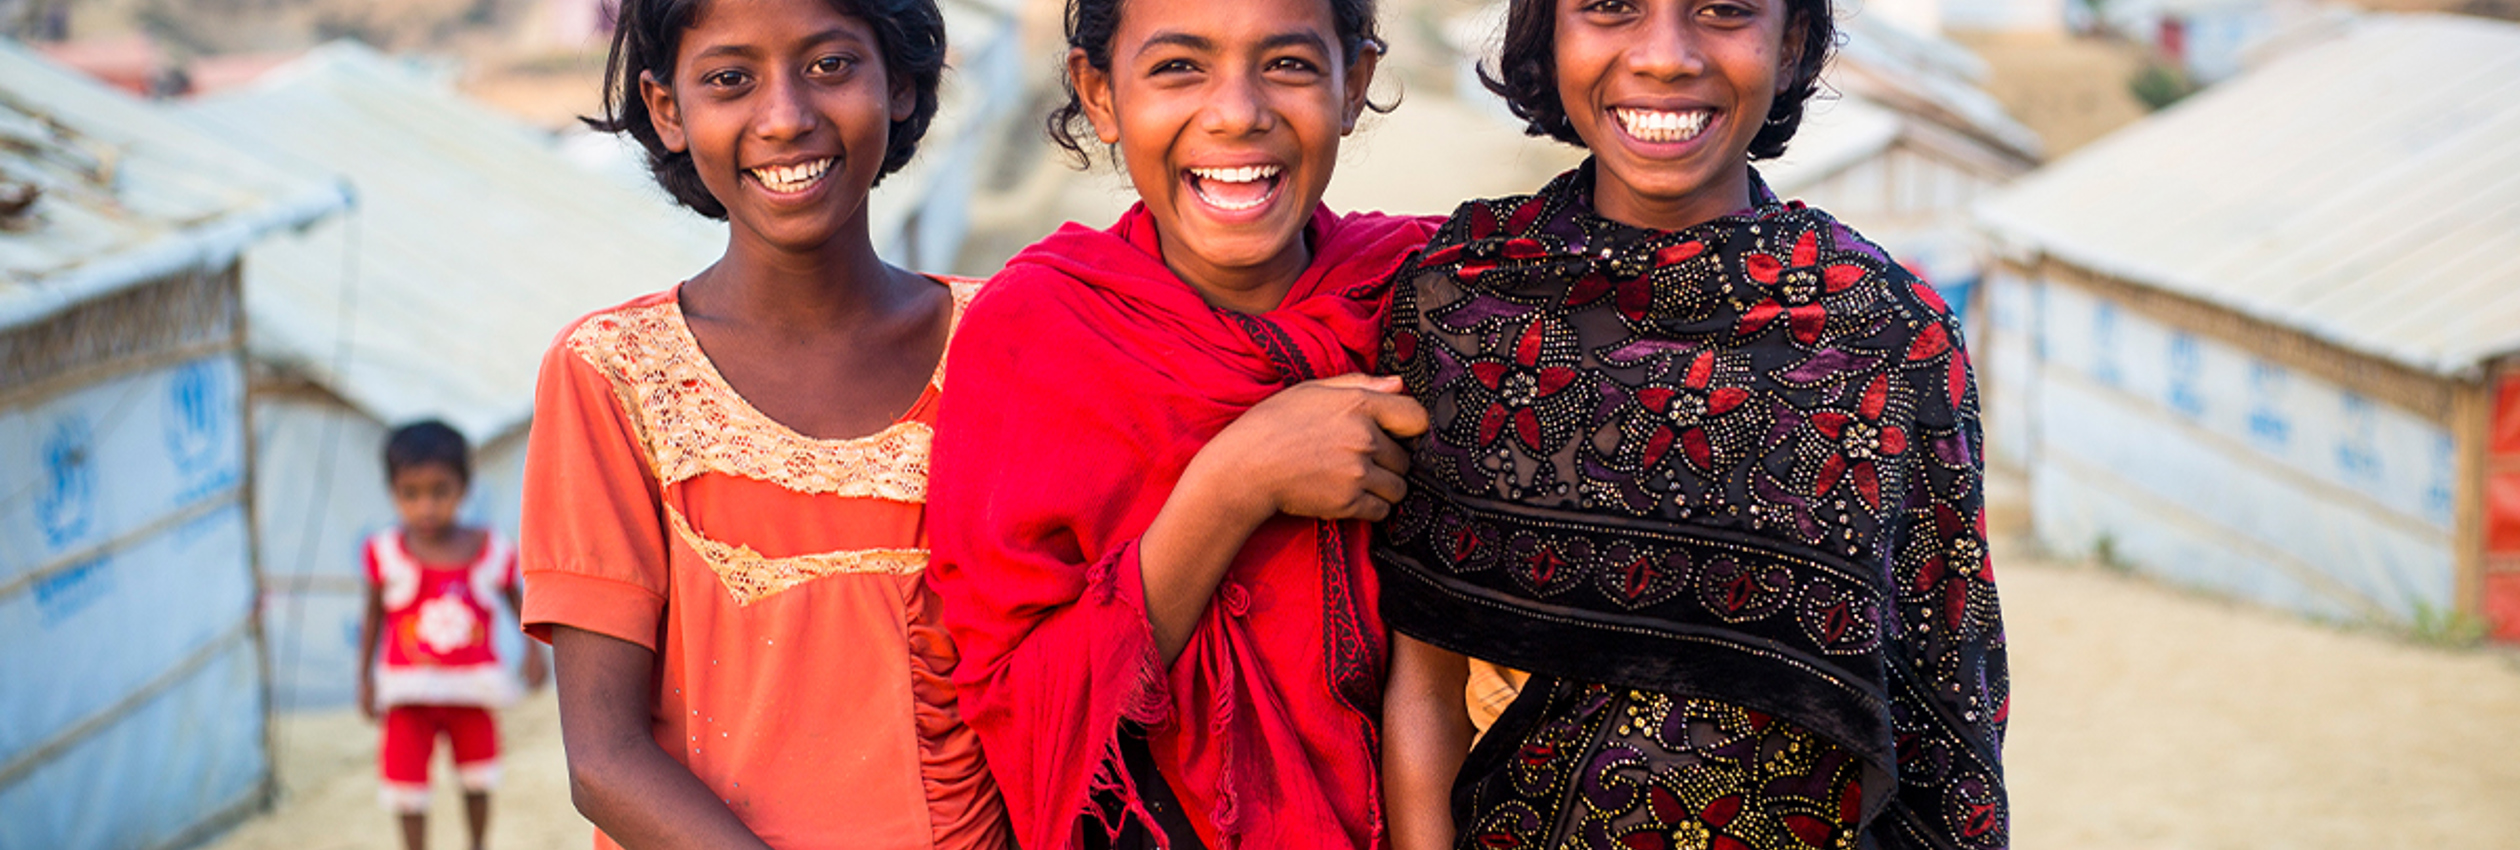 Three young girls, smiling at camera. © UNHCR/Roger Arnold